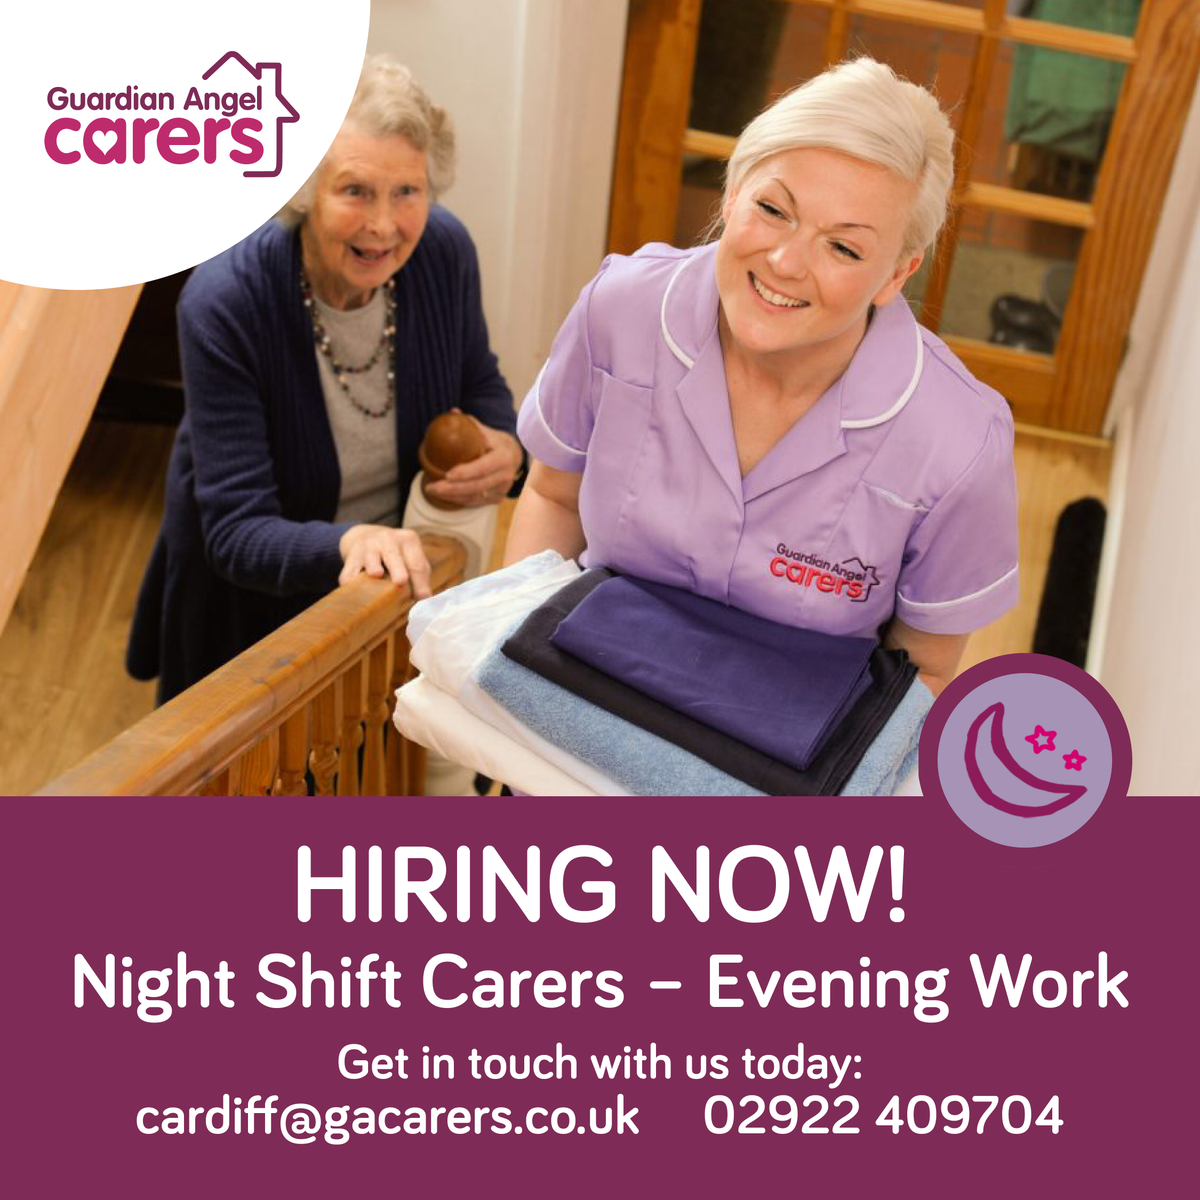 We are looking for Night Shift Carers to come and join our wonderful team of CareAngels! To find out more click the link below and get applying! bit.ly/3mijvYF
#NightShiftCarer #CardiffJobs #CareerInCare